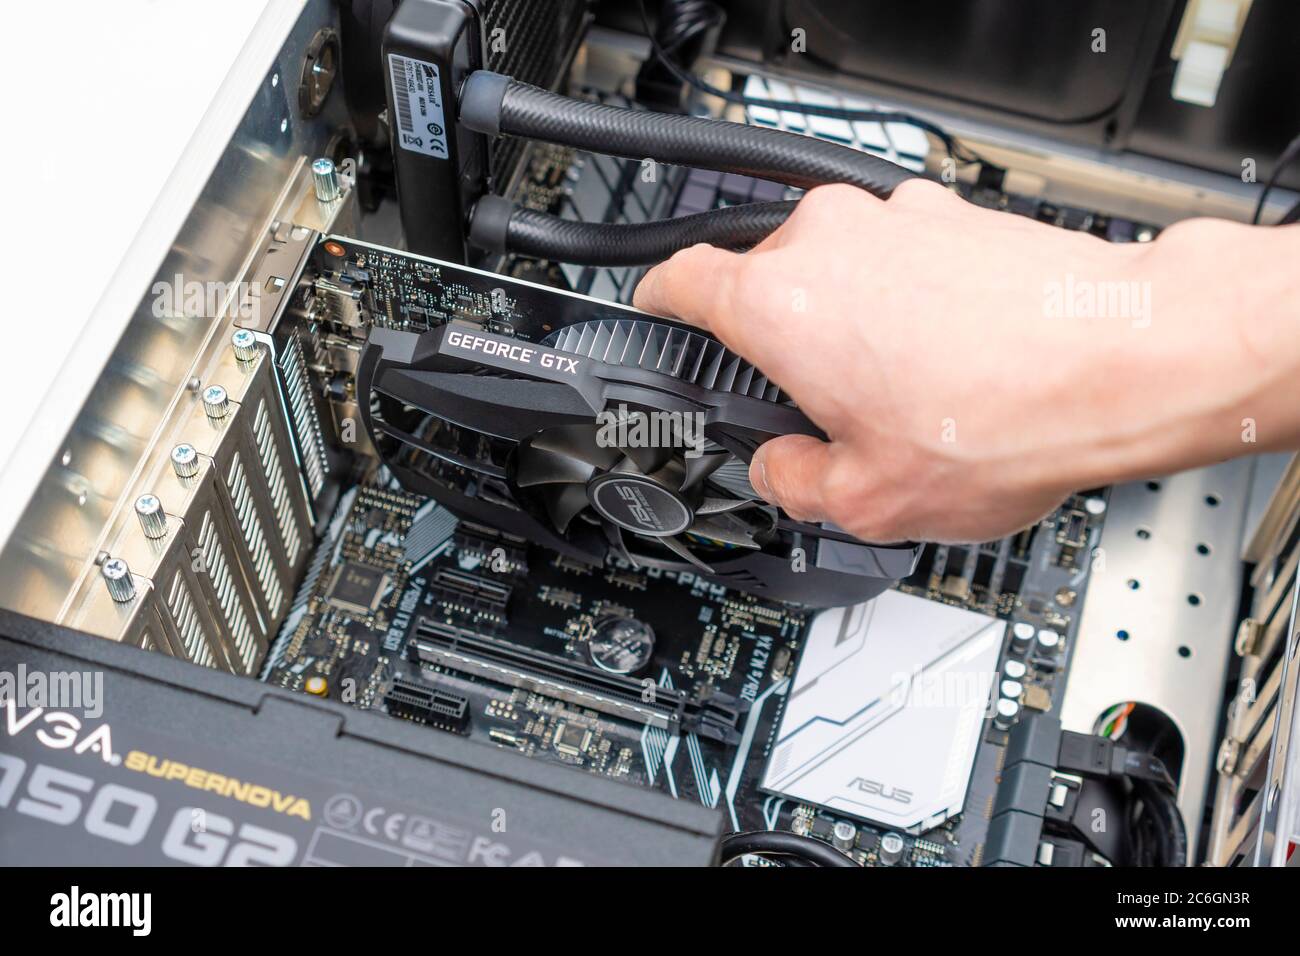 Installing graphic card in a computer Stock Photo - Alamy